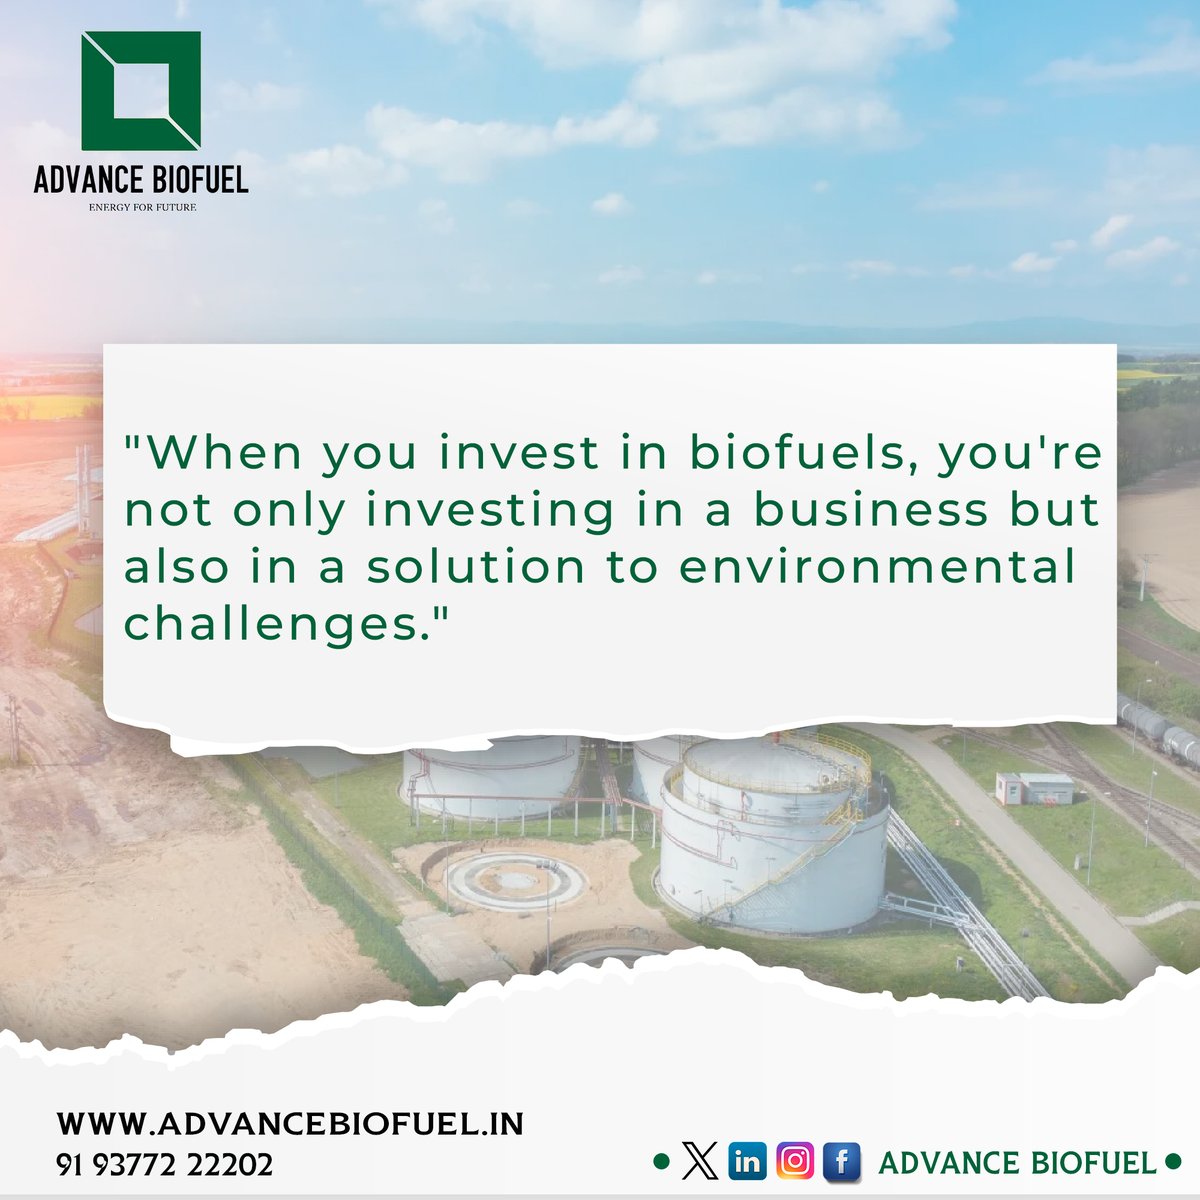 When you invest in biofuels, you're not only investing in a business but also in a solution to environmental challenges.

#Advancebiofuel #GreenInvesting #RenewableFuture #GreenEconomy #EcoFriendlyInvesting #BiofuelsForChange